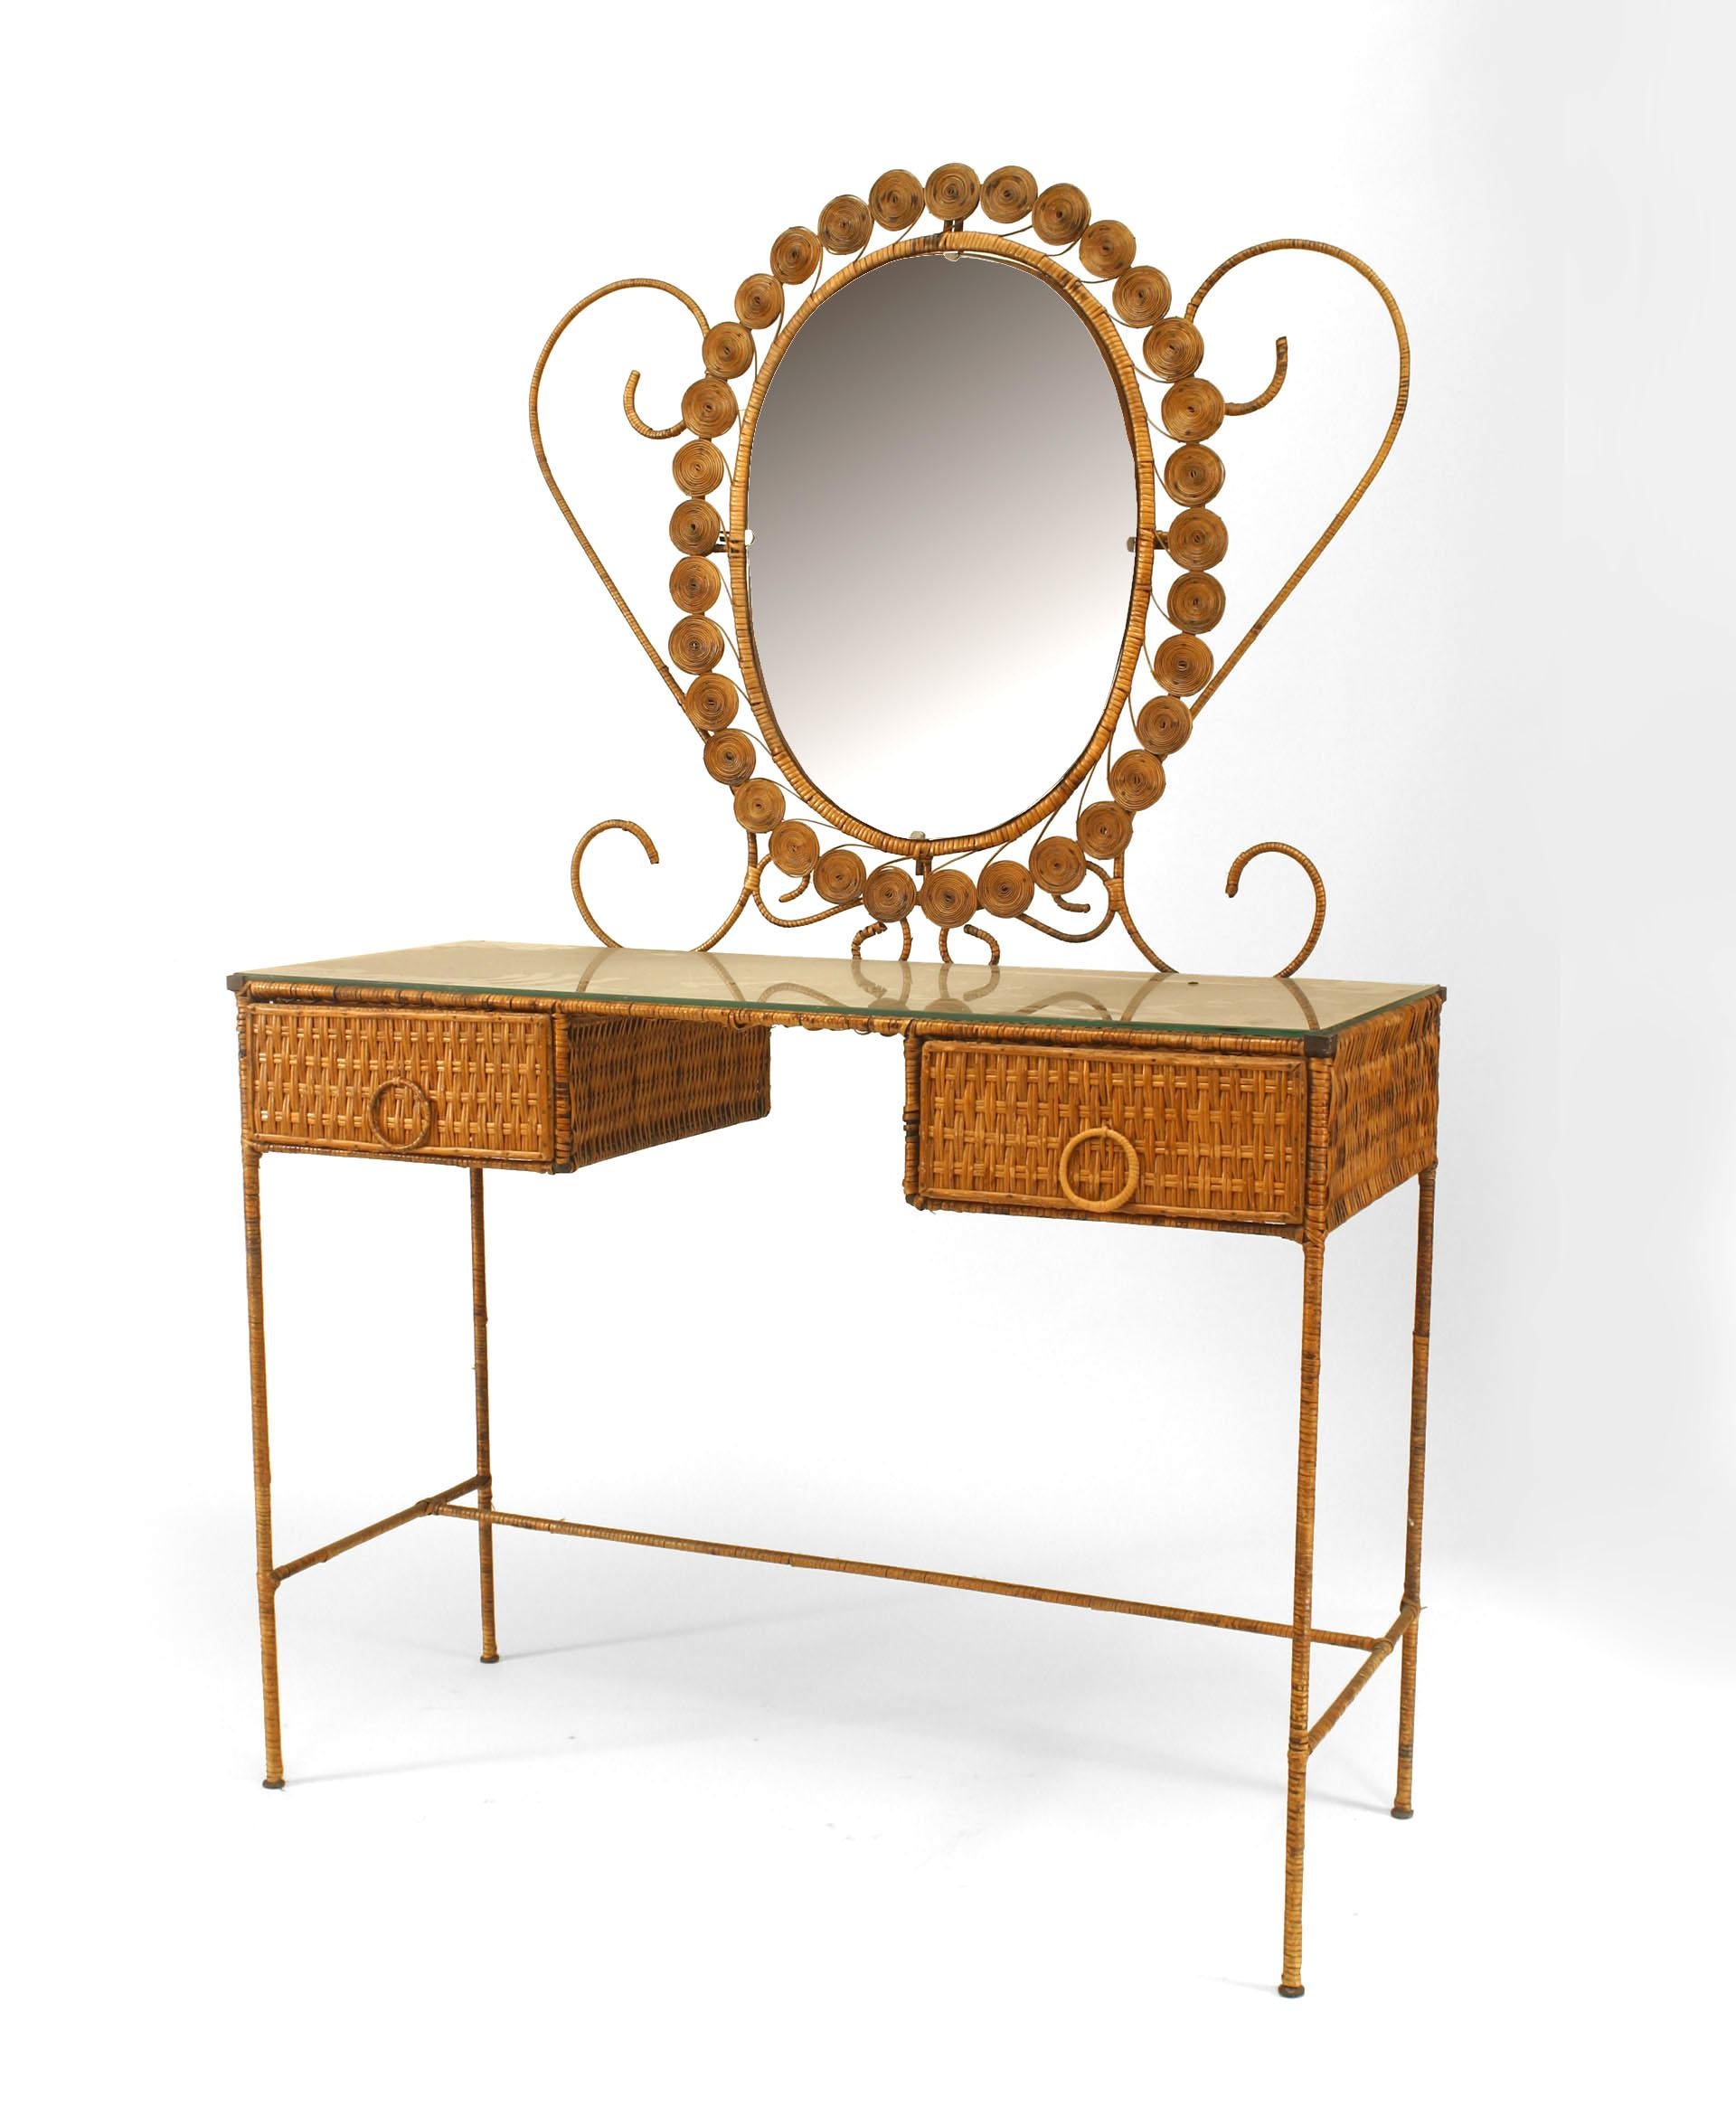 French natural wicker dressing table featuring a dramatically framed oval mirror, two drawers with circular pulls, and a glass top.